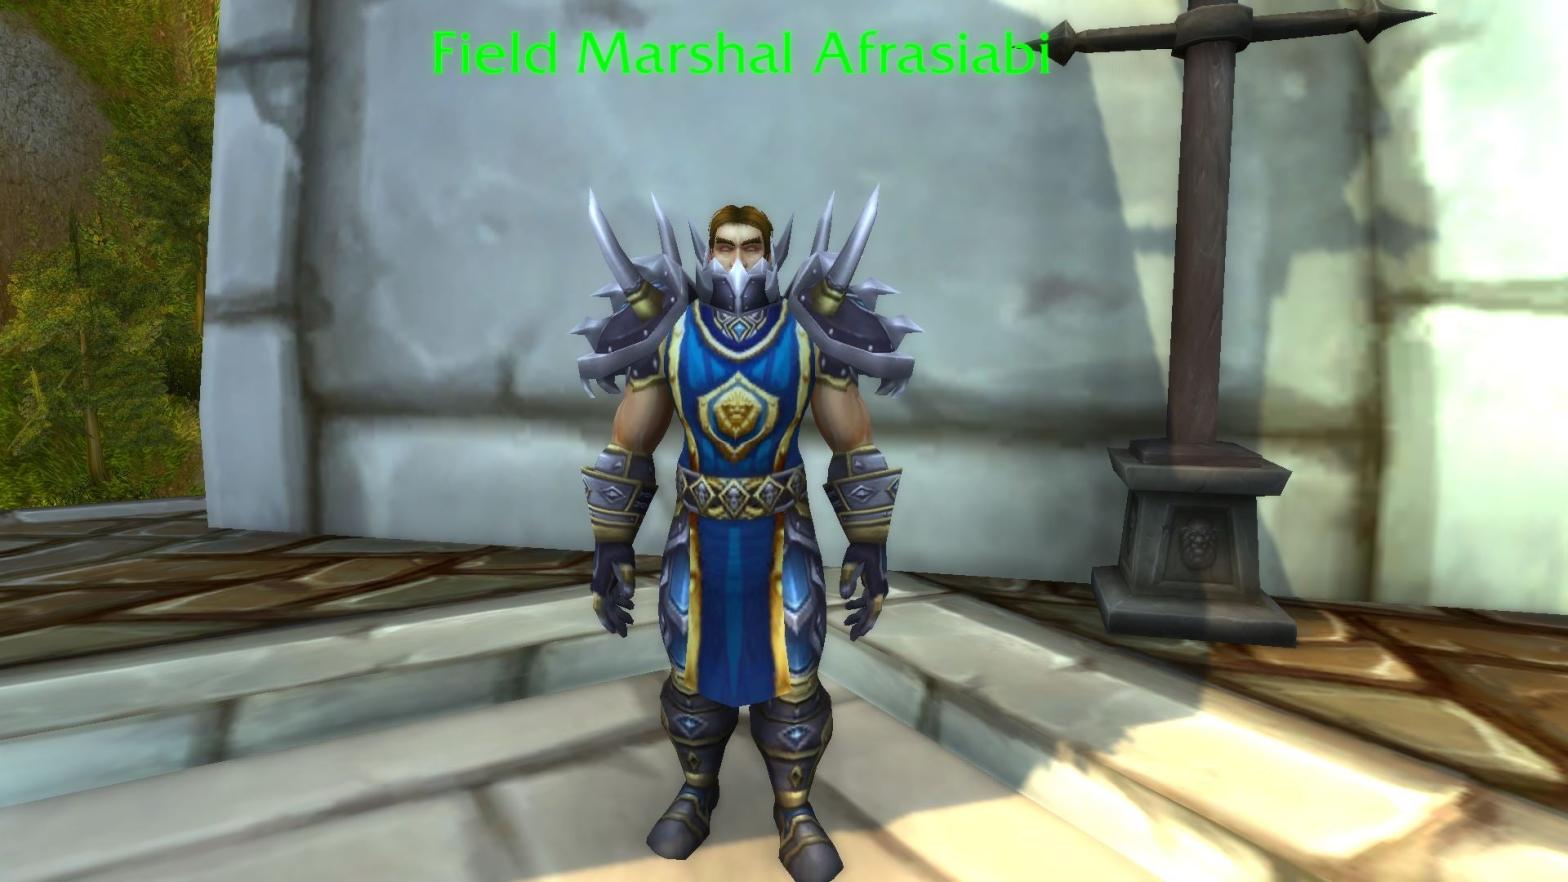 Field Marshal Afrasiabi is one of multiple NPCs named for Alex Afrasiabi who is mentioned in the Activision Blizzard lawsuit. (Screenshot: Blizzard / Kotaku)